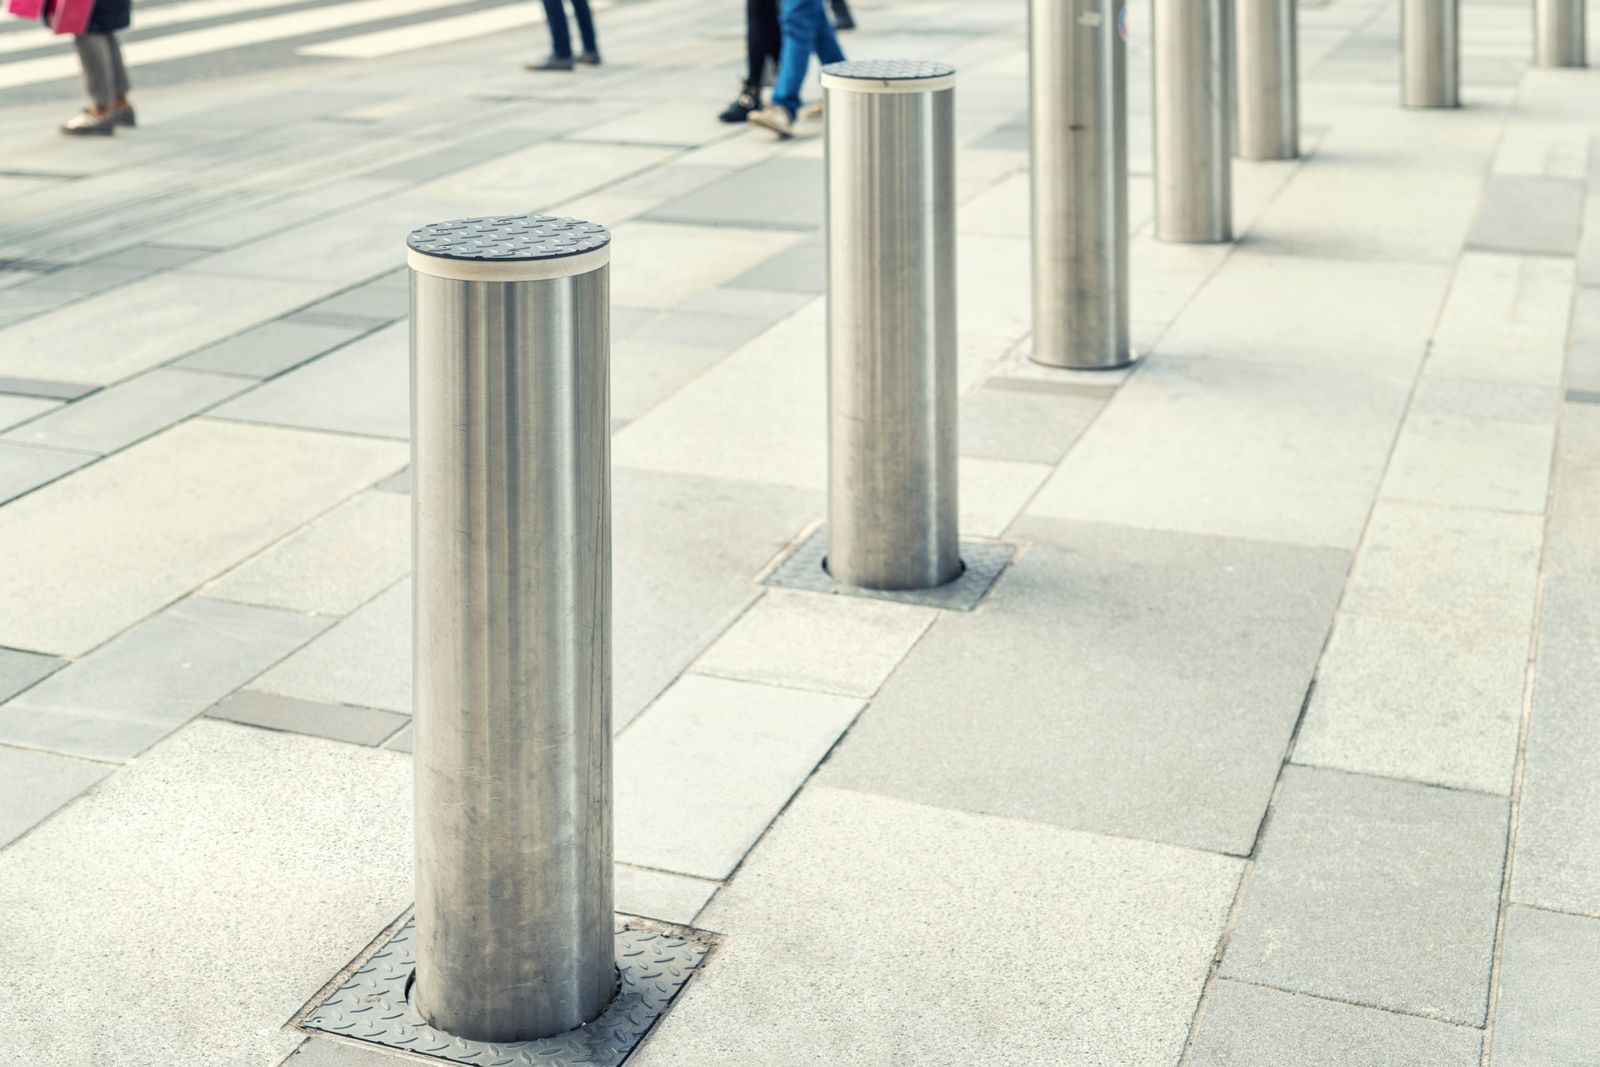 The different types of safety bollards available